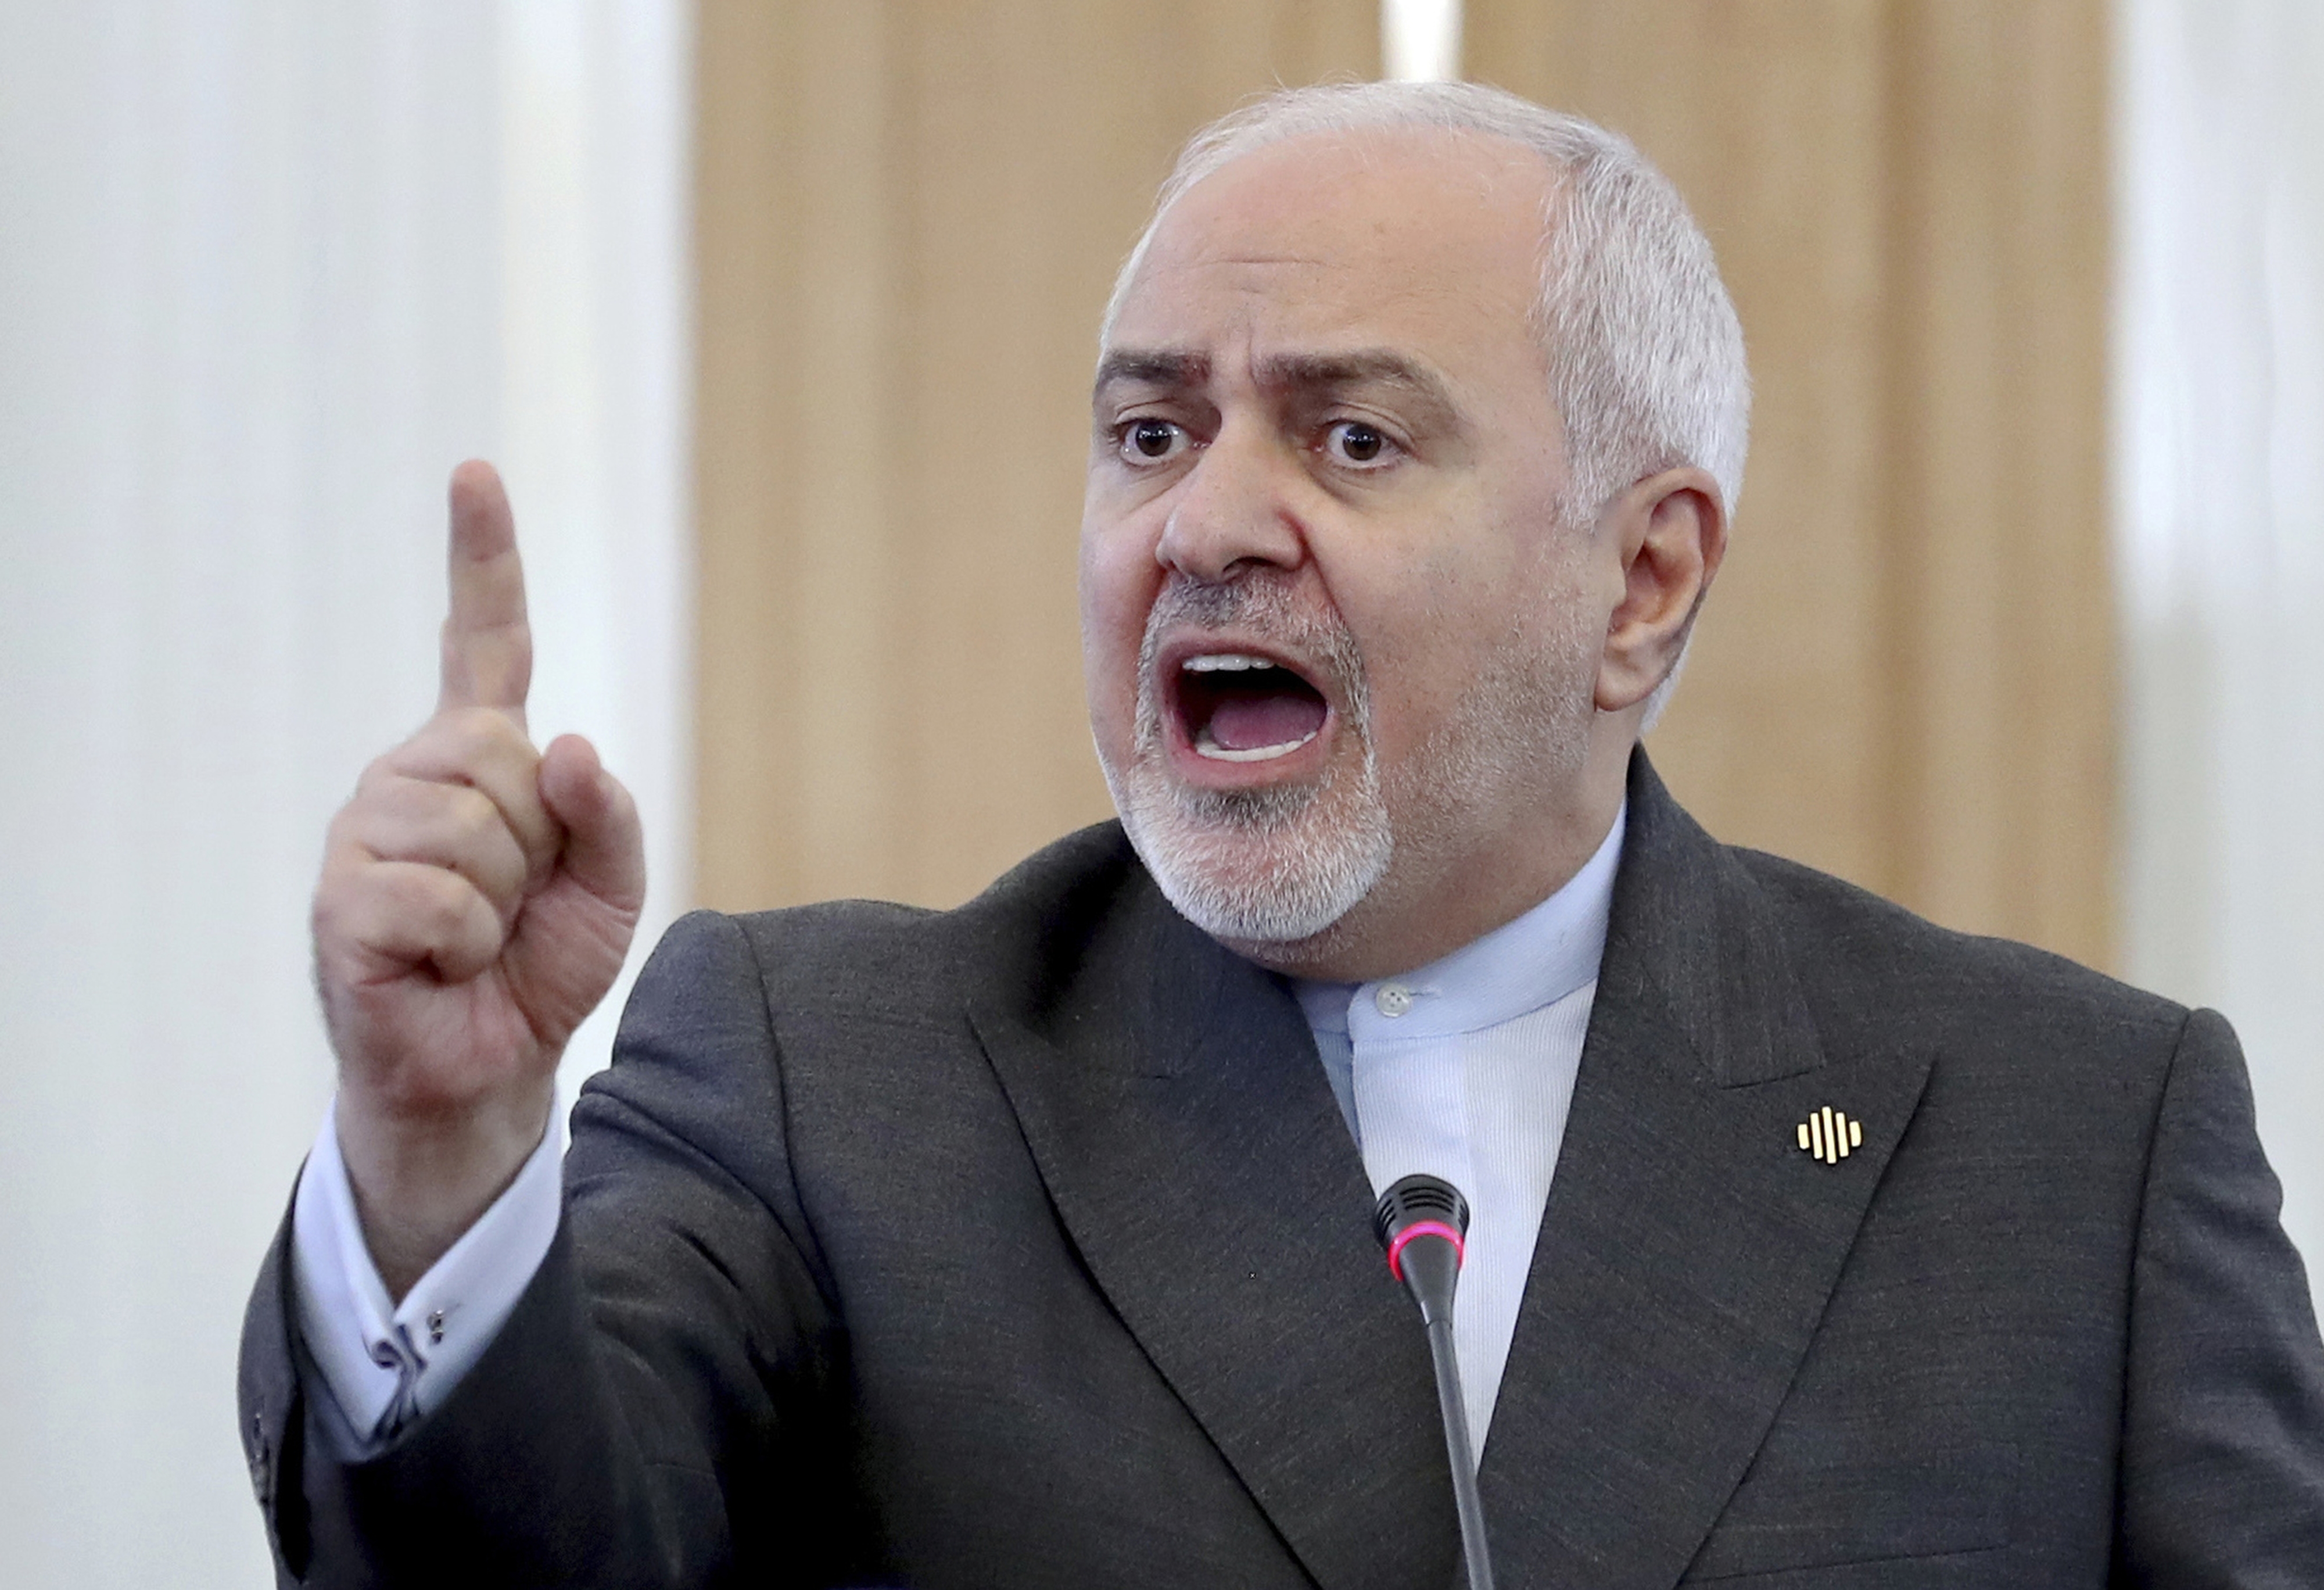 Leaked Recording of Iran’s Top Diplomat Offers Blunt Talk